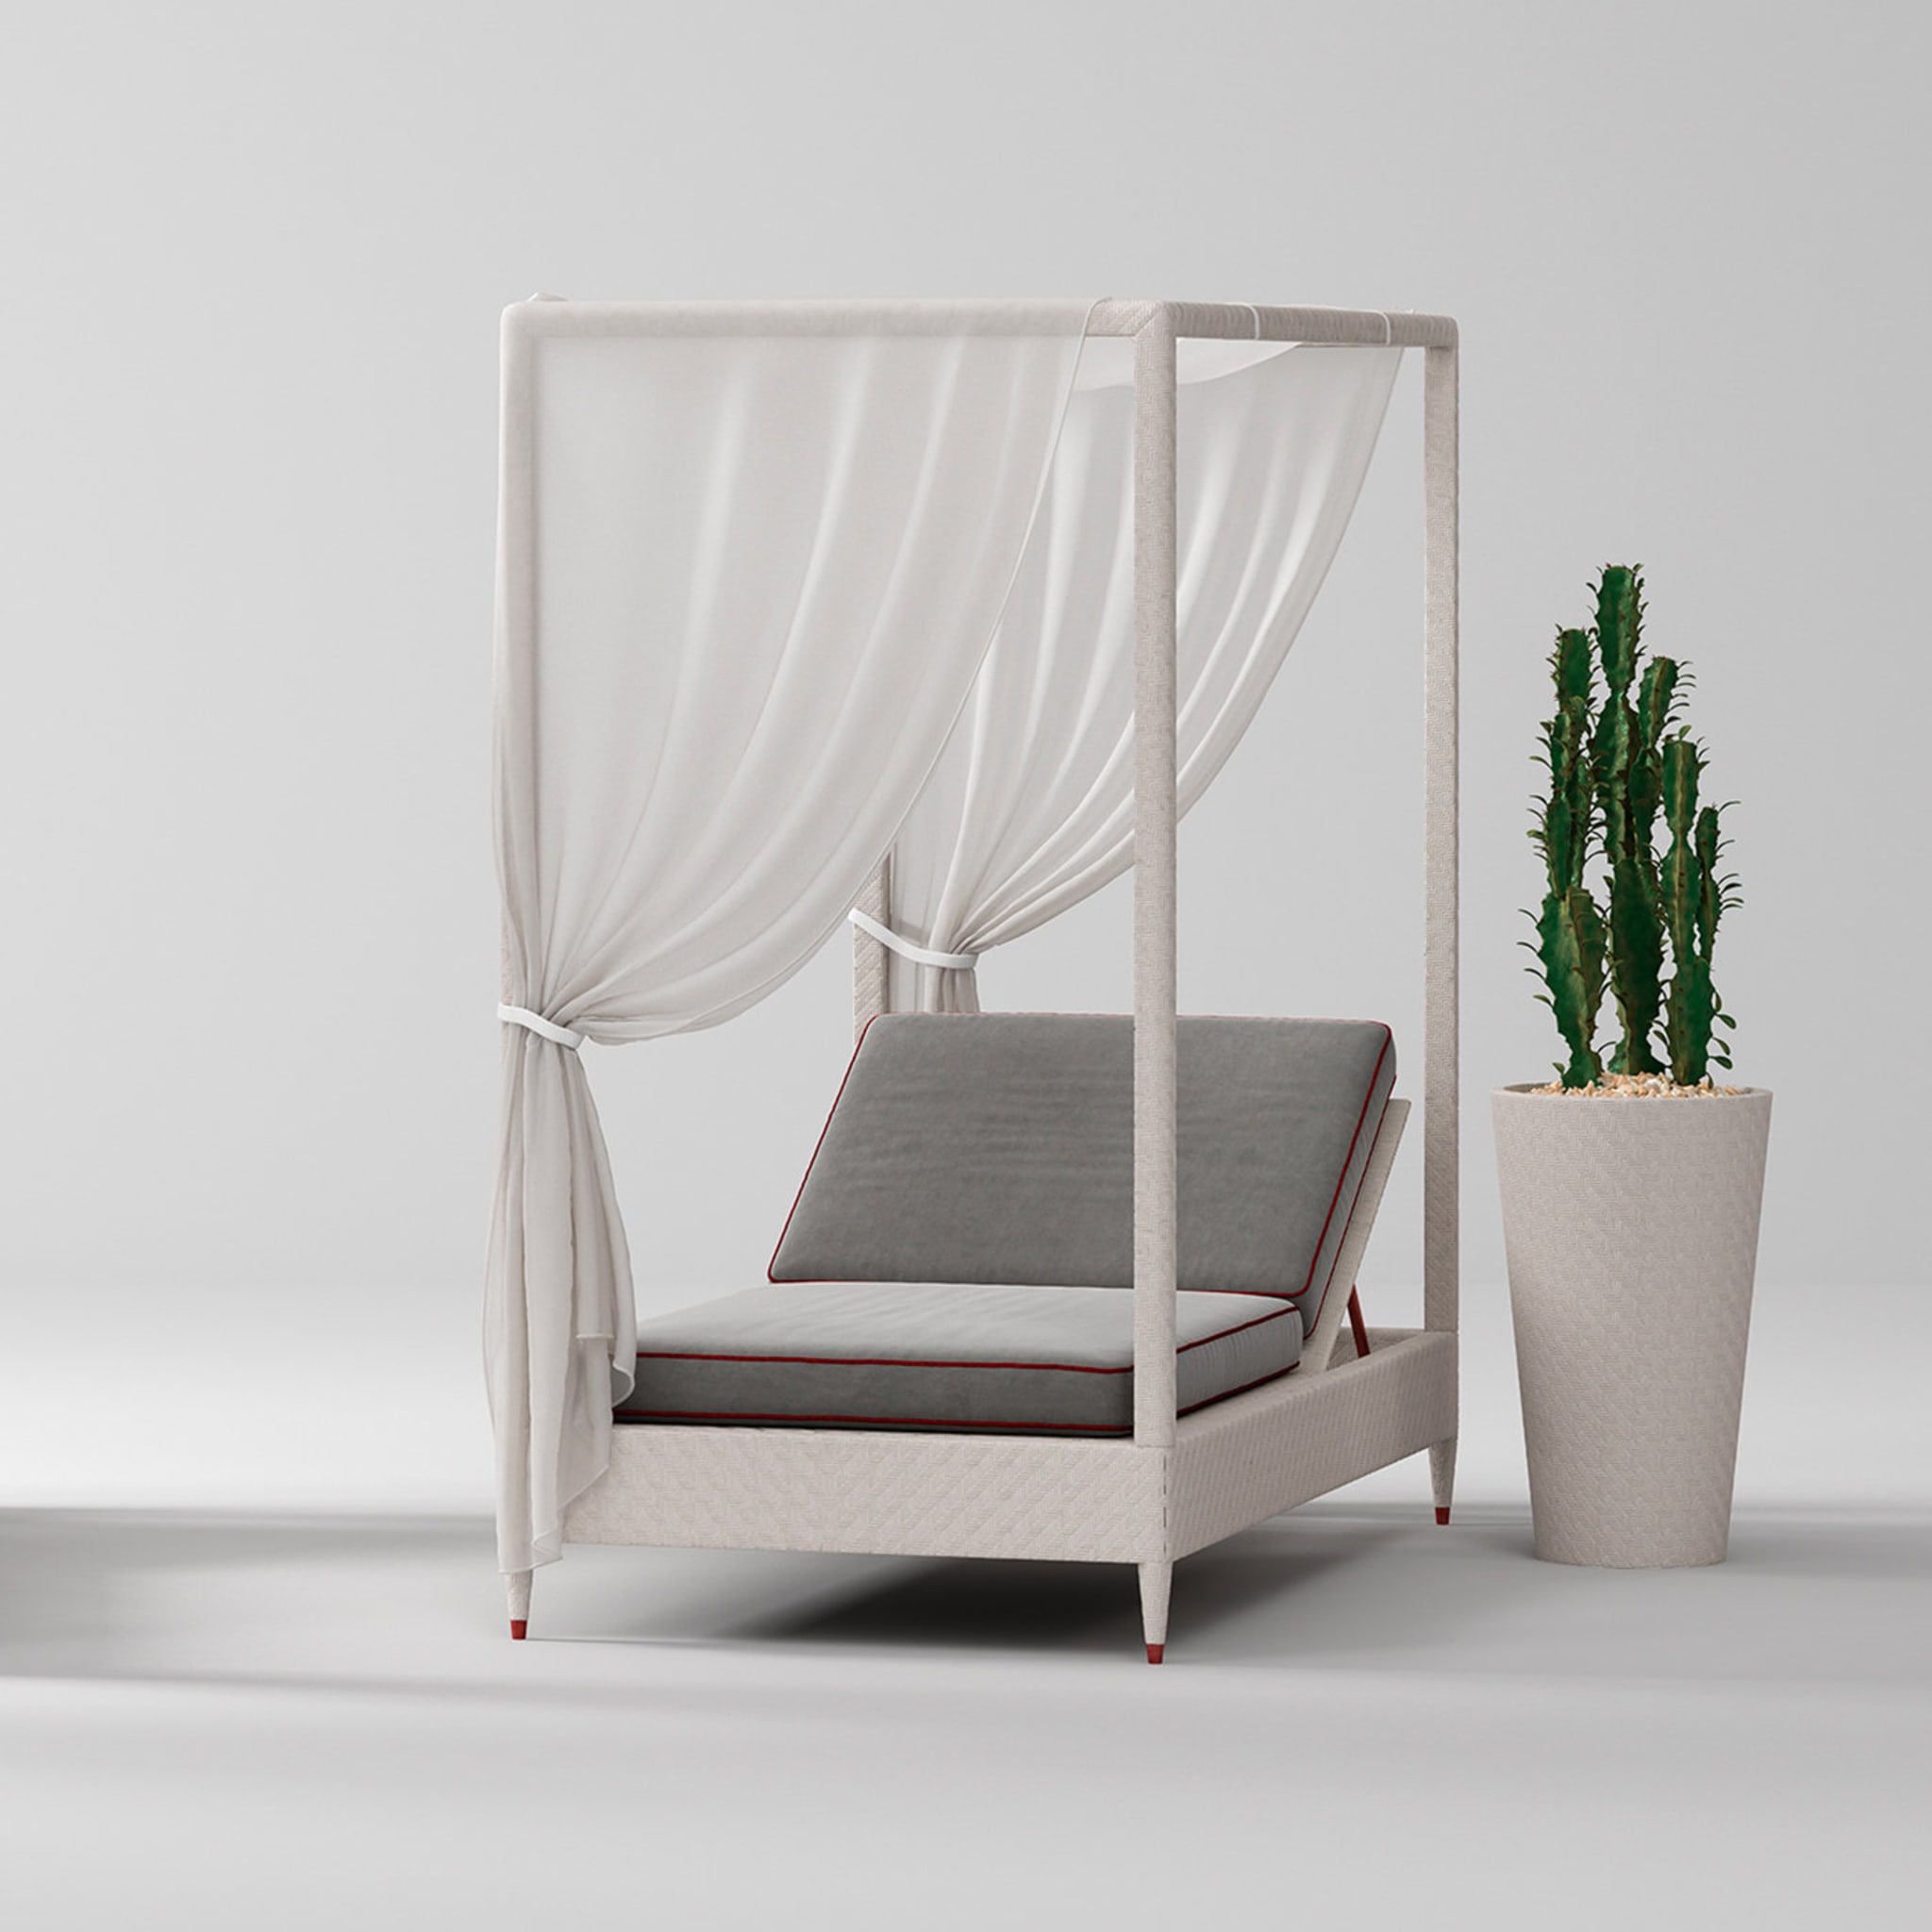 White 1-Seater Daybed with Canopy - Alternative view 1